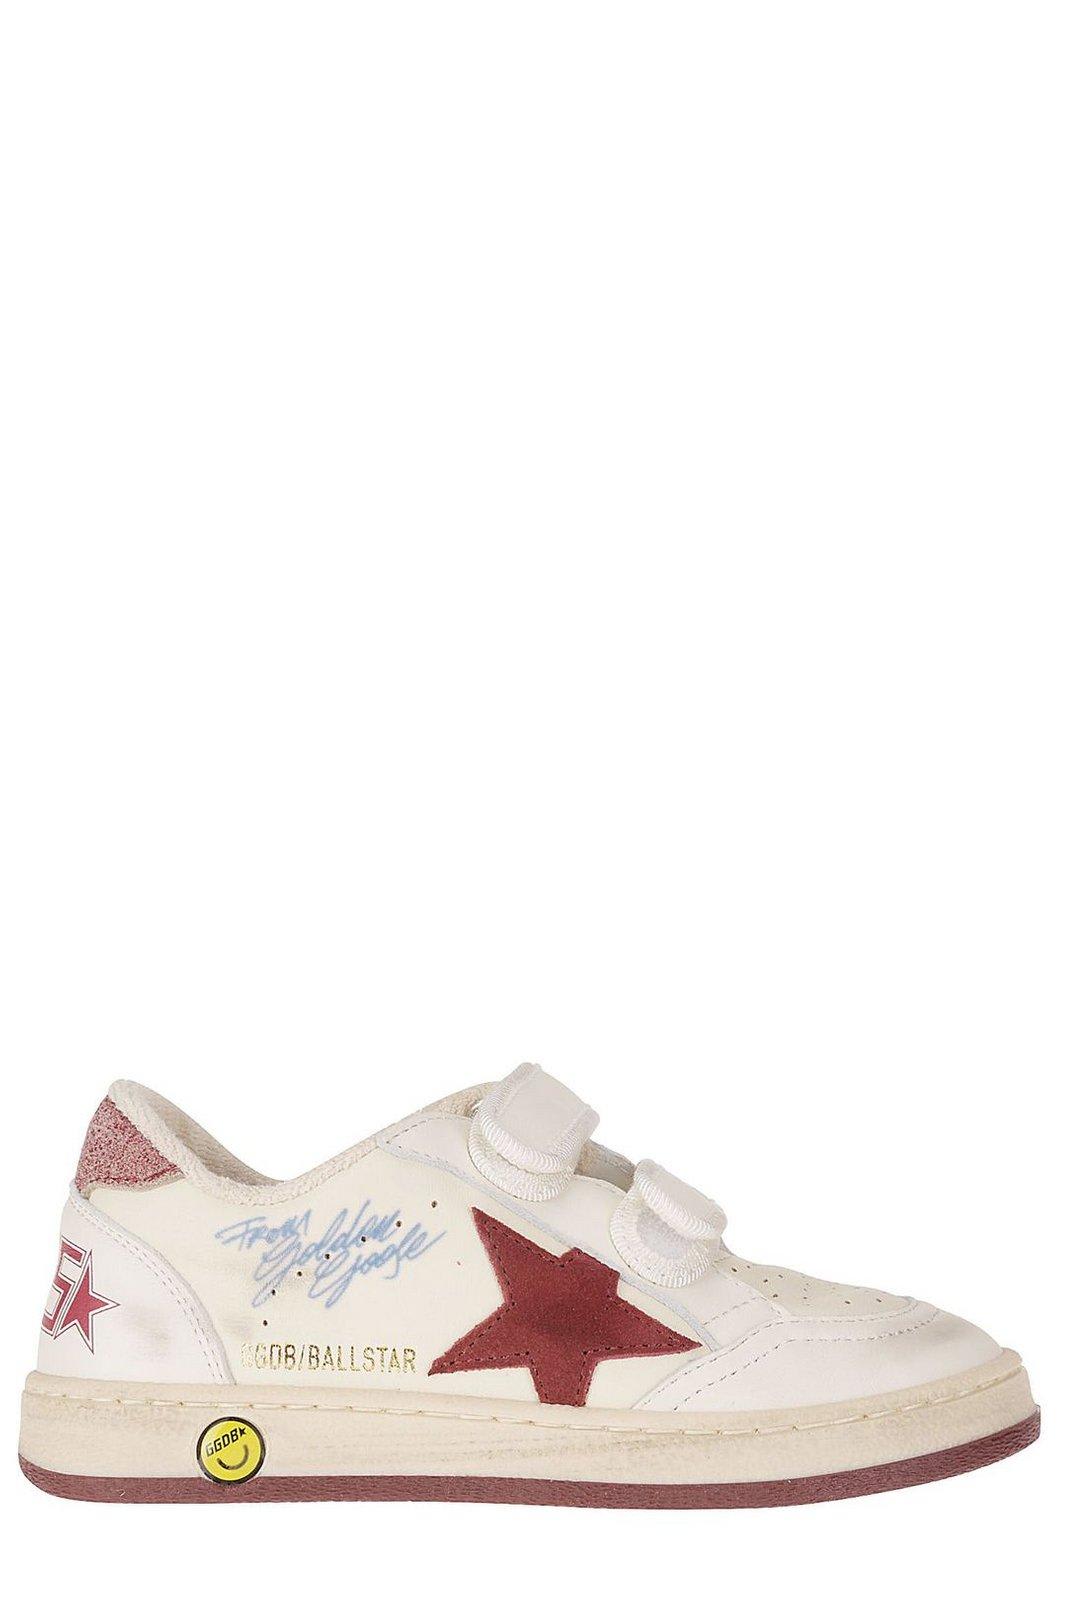 Golden Goose Ball Star Panelled Sneakers